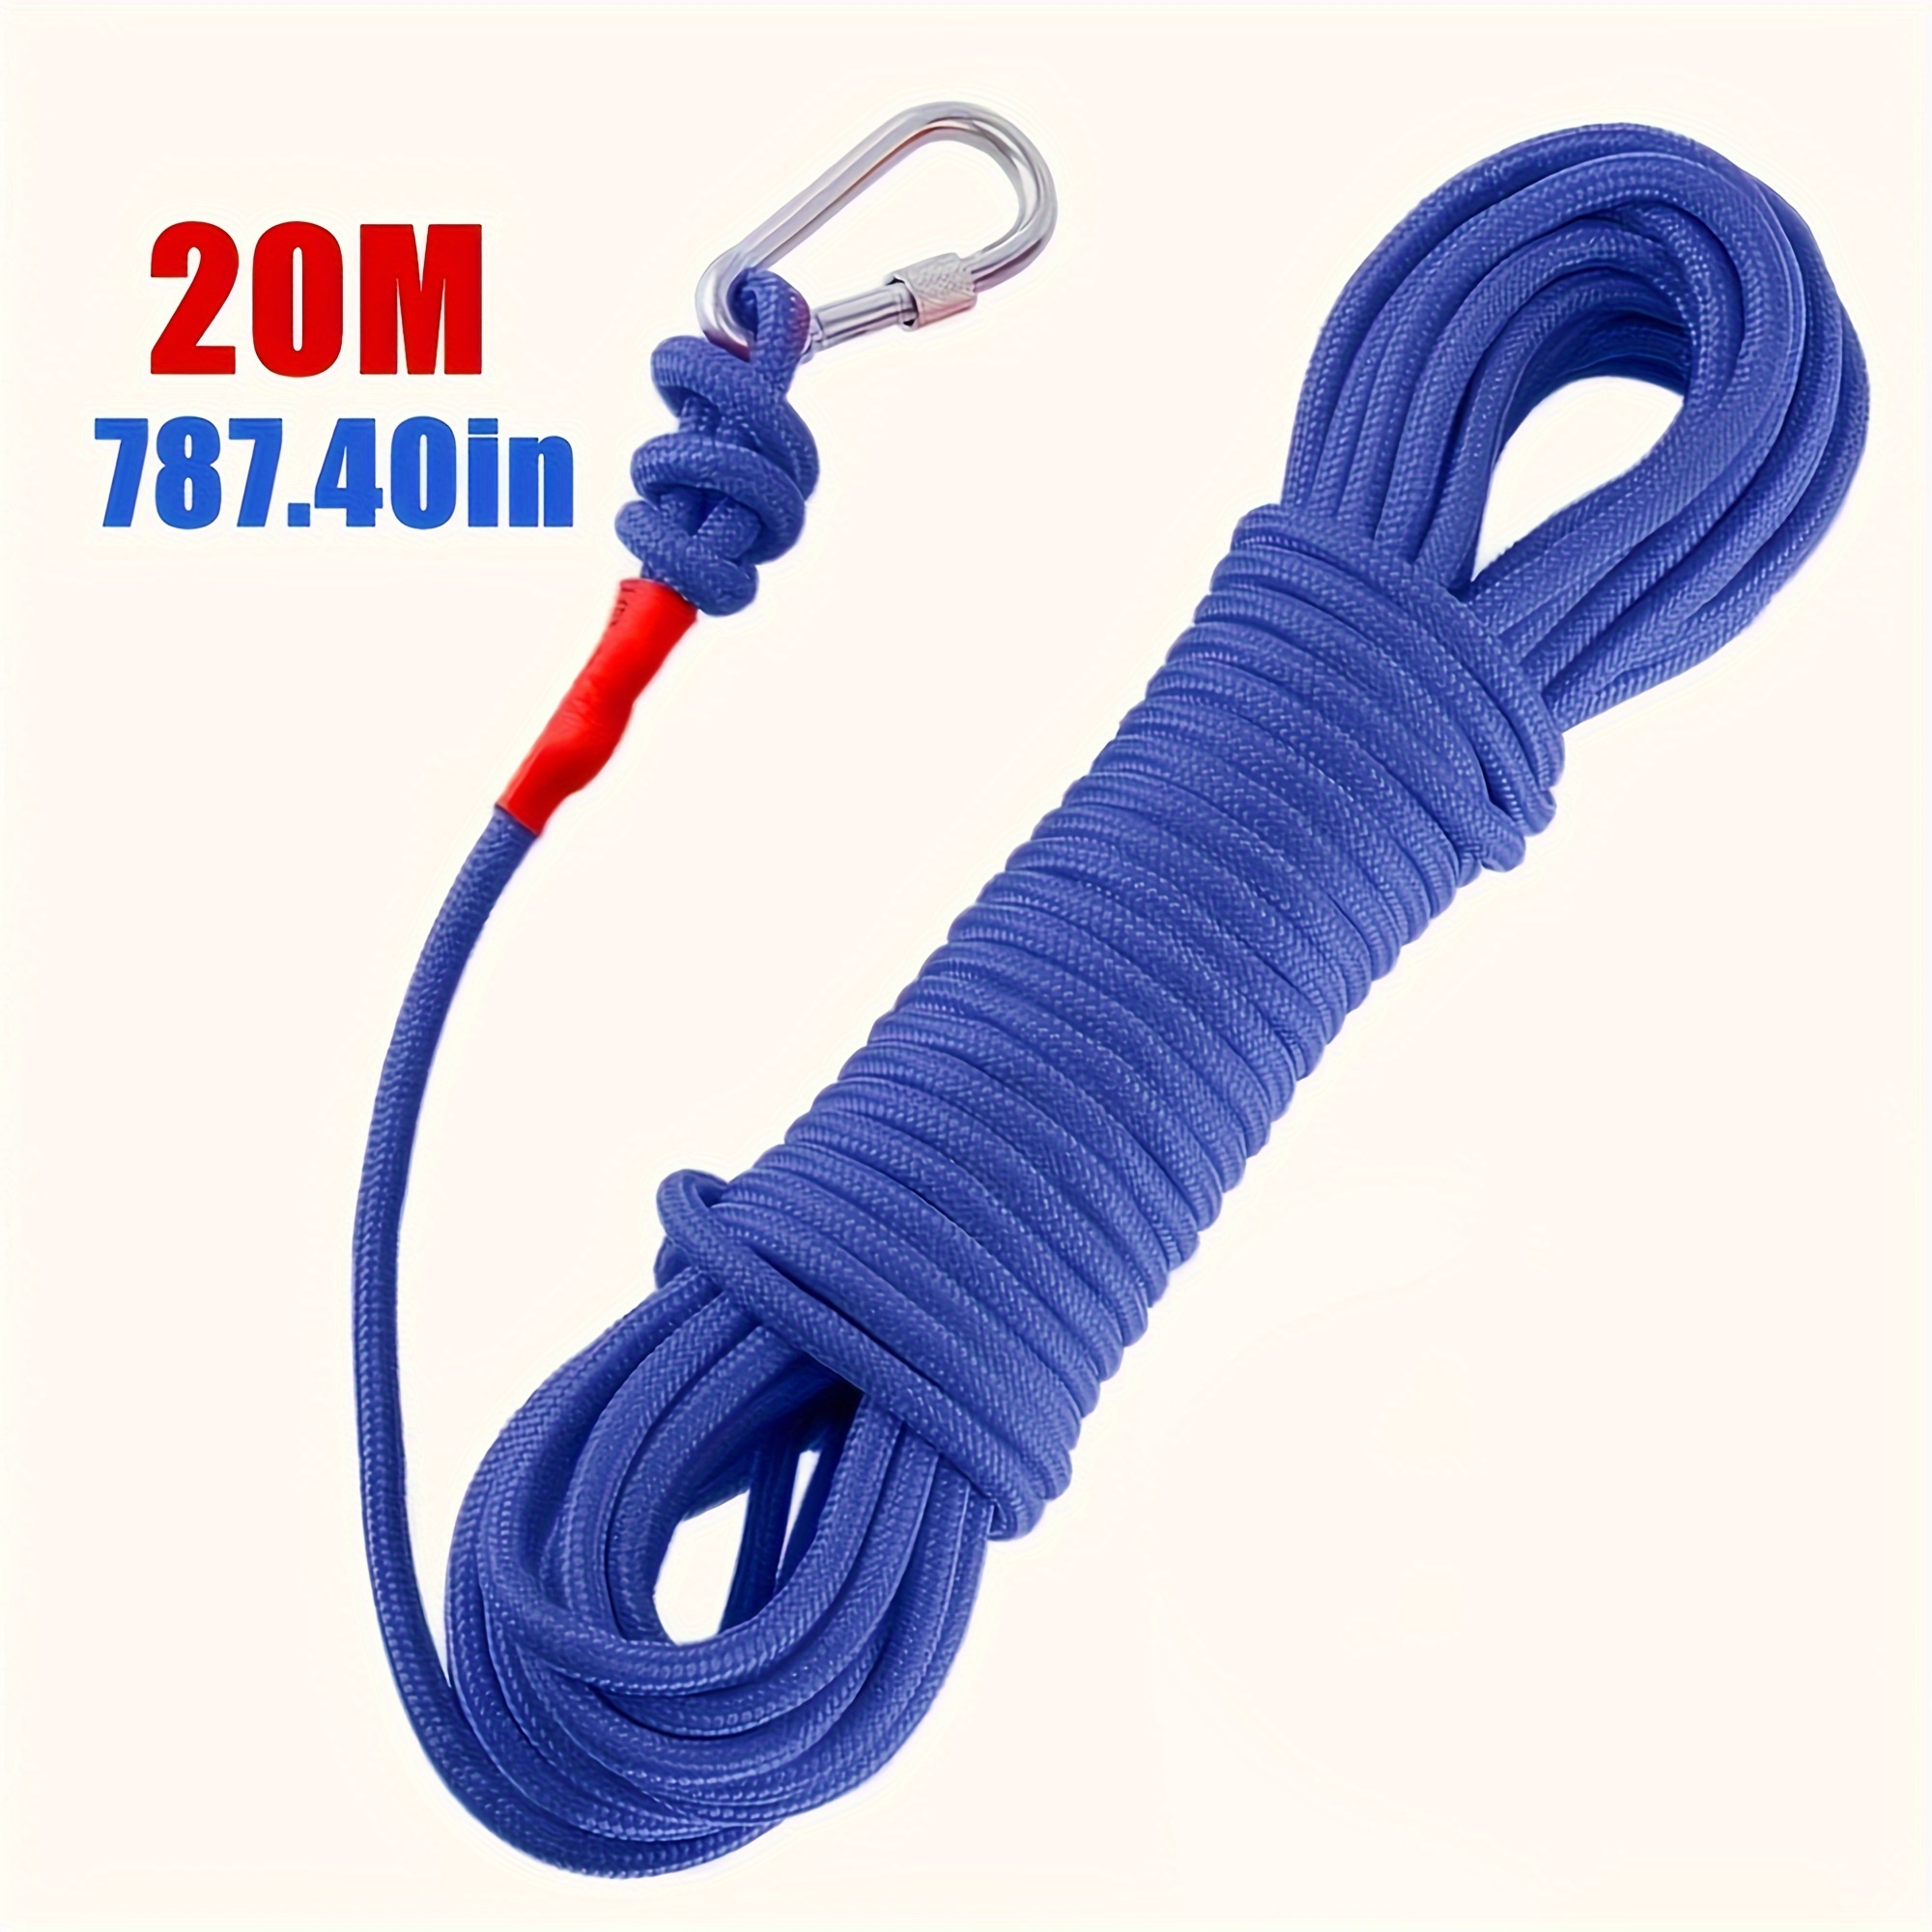 

1pc 10m/20m Magnet Fishing Rope, Carabiner Nylon Braided Rope, Nylon Mooring Line For Anchor, Clothesline, Boat Anchor, Crafting, Blocking, Pulling, Draging, Cargo, Tying, Tow Rope, Paracord Leash